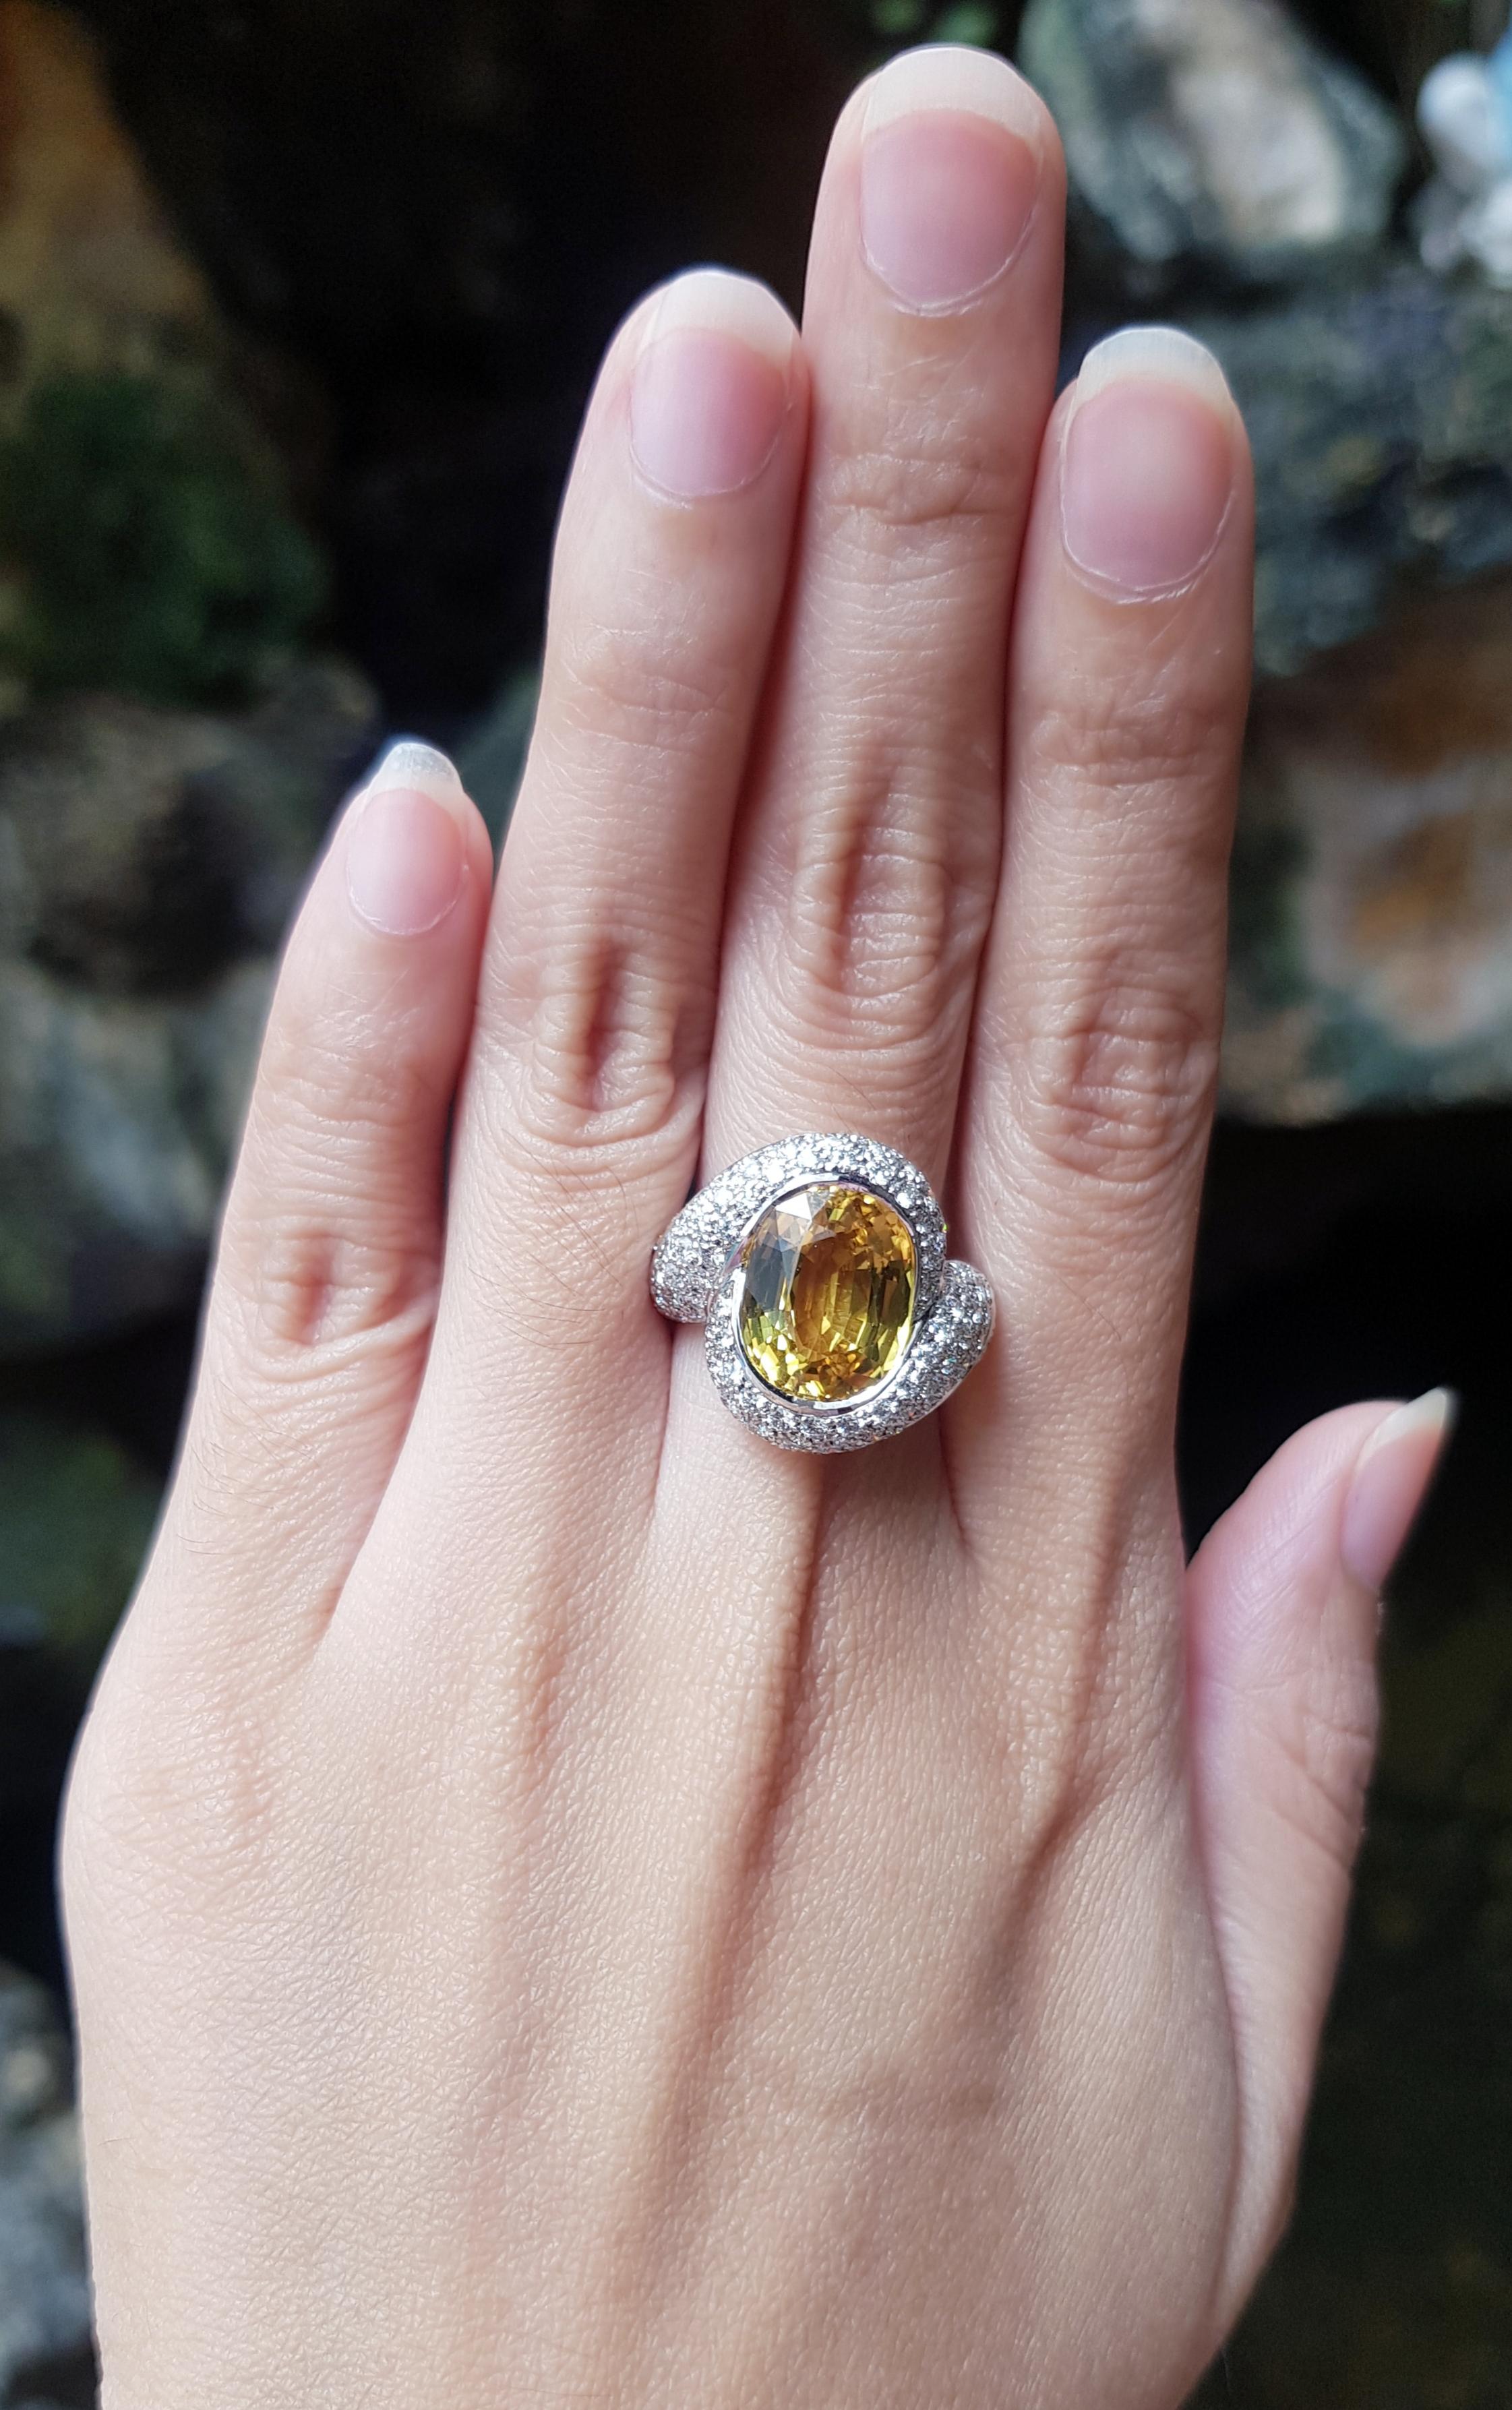 Yellow Sapphire 7.34 carats with Diamond 1.57 carats and Yellow Sapphire 0.86 carat Ring set in 18 Karat White Gold Settings

Width:  1.8 cm 
Length: 1.9 cm
Ring Size: 55
Total Weight: 10.12 grams

